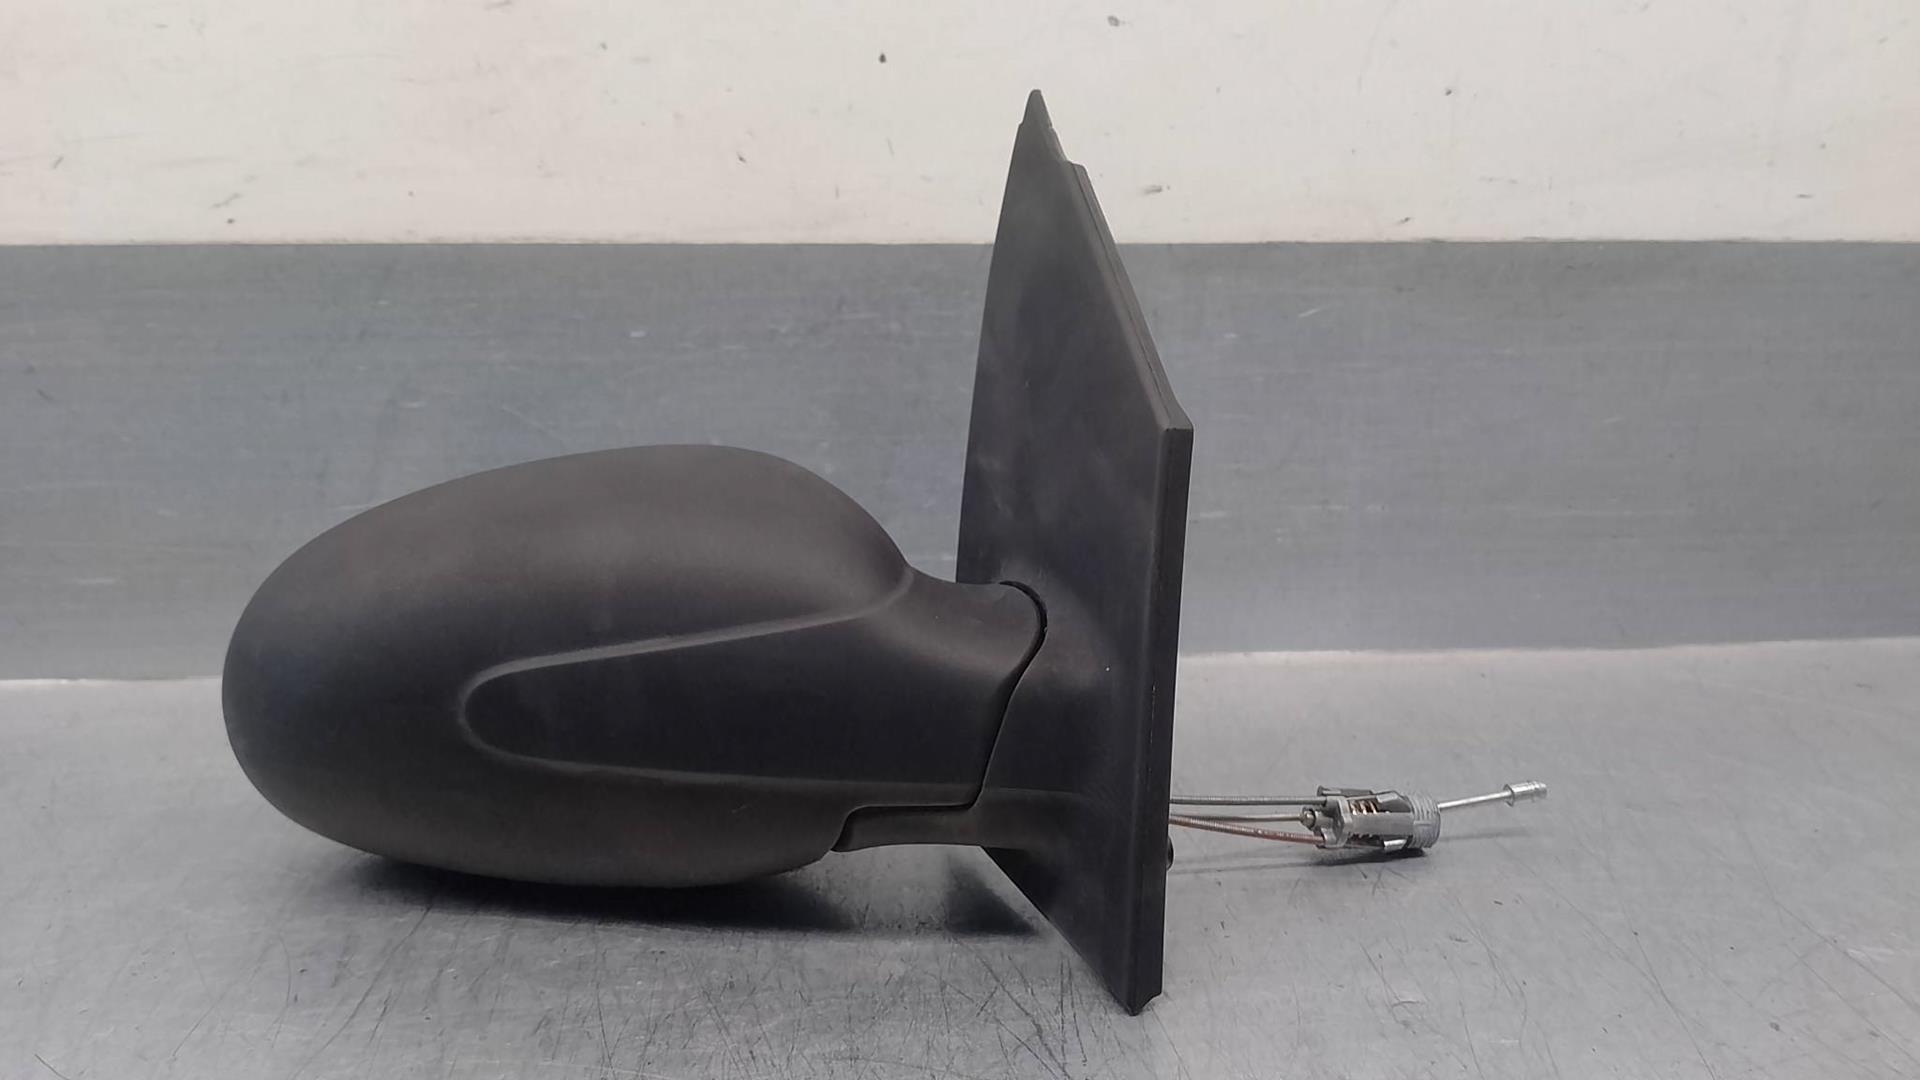 SMART Fortwo 1 generation (1998-2007) Right Side Wing Mirror 0000512V007C22A0, MANUAL, 3PUERTAS 23753450